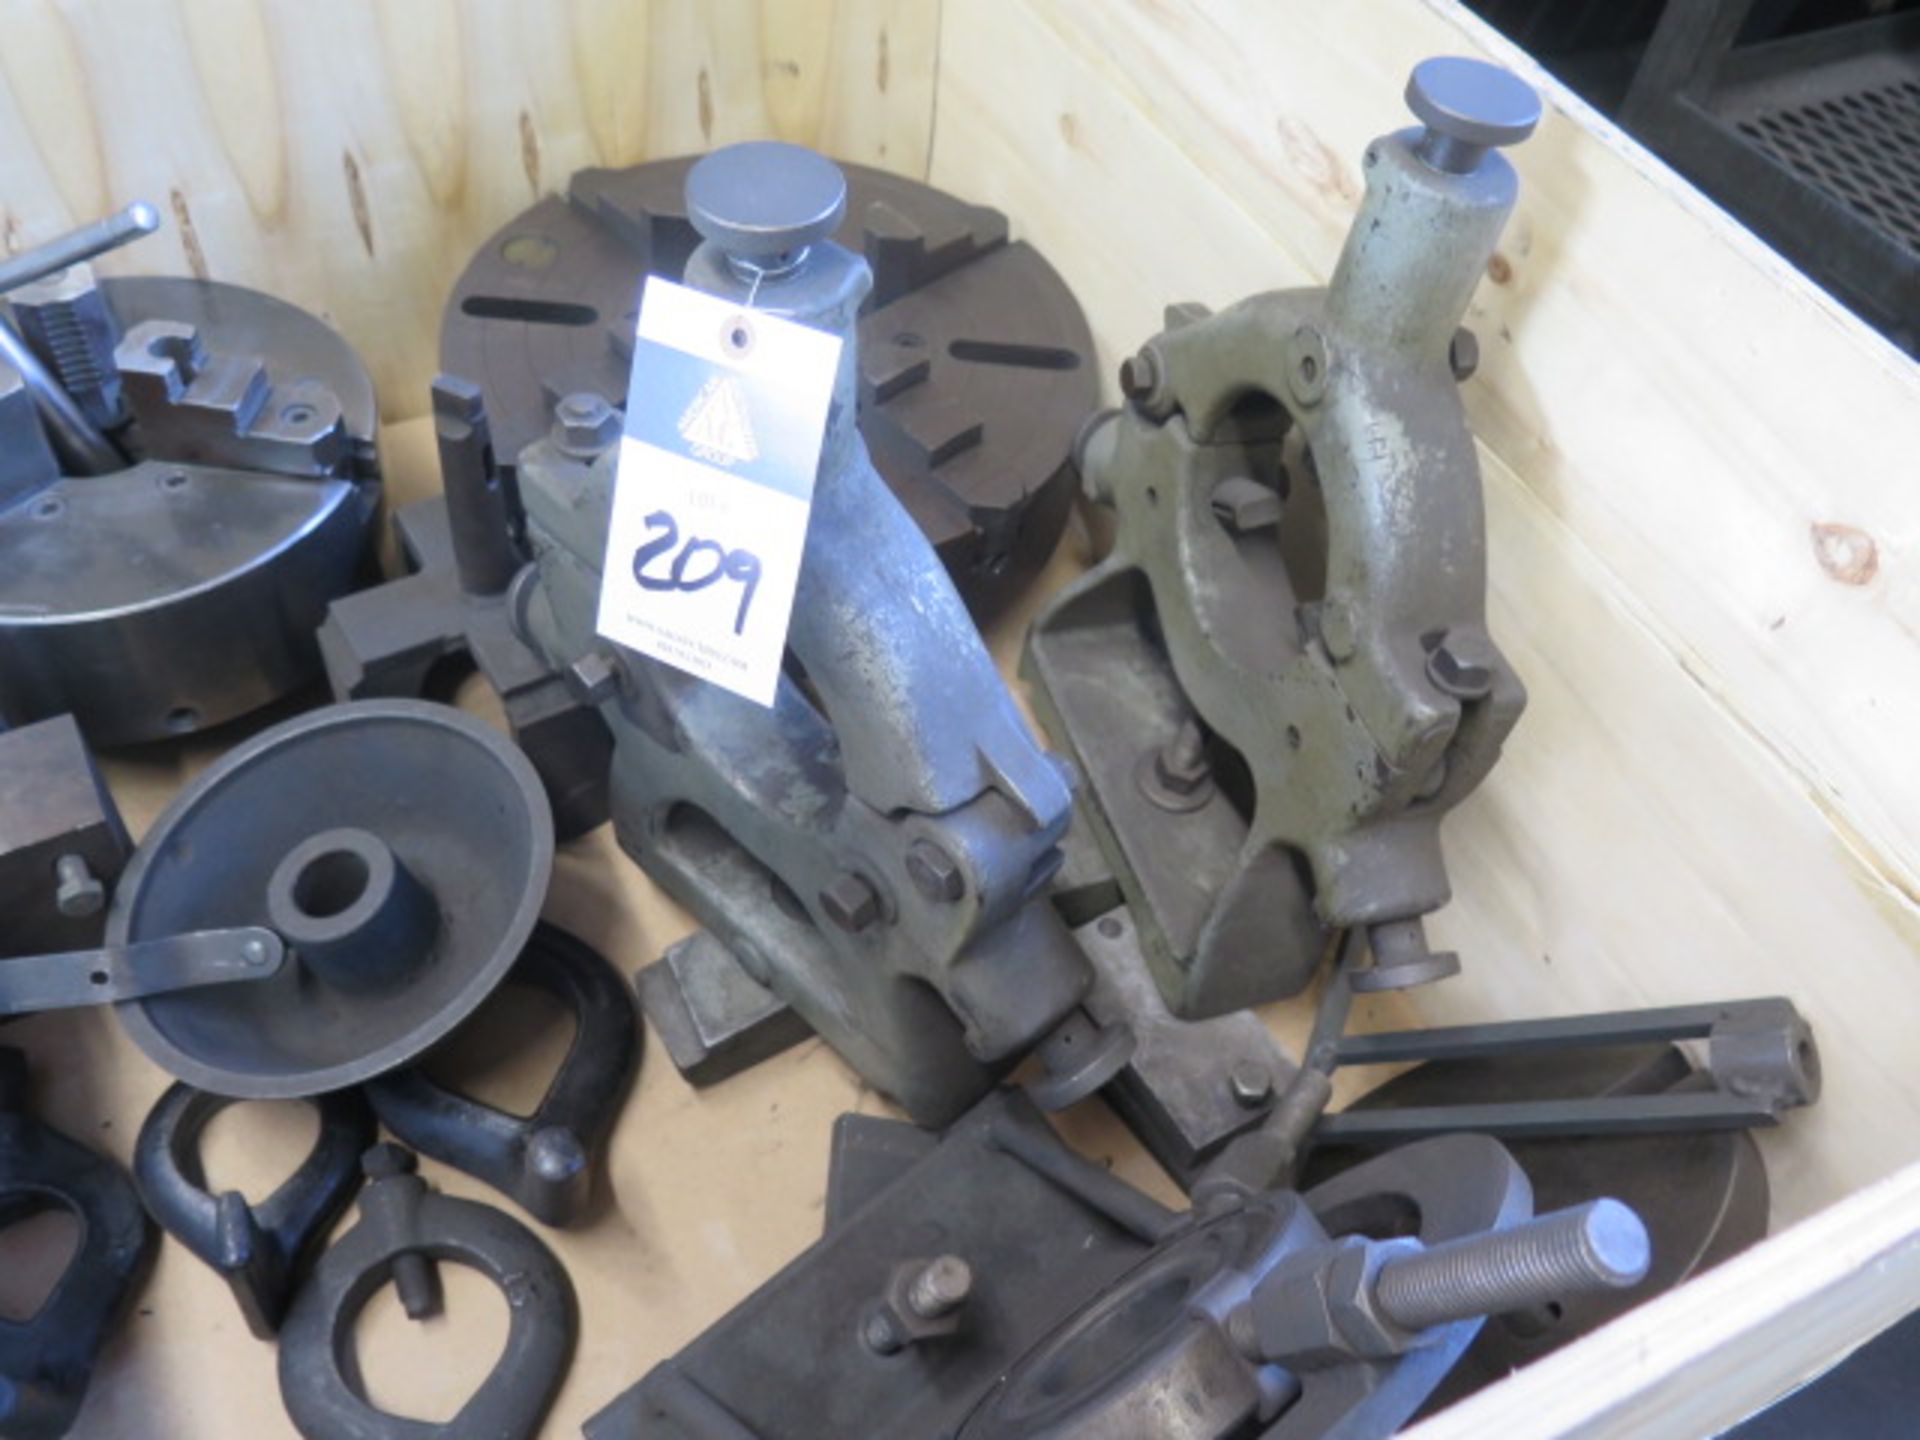 15" 4-Jaw Chuck, 12" 3-Jaw Chuck, Steady Rests and Misc (SOLD AS-IS - NO WARRANTY) - Image 6 of 6